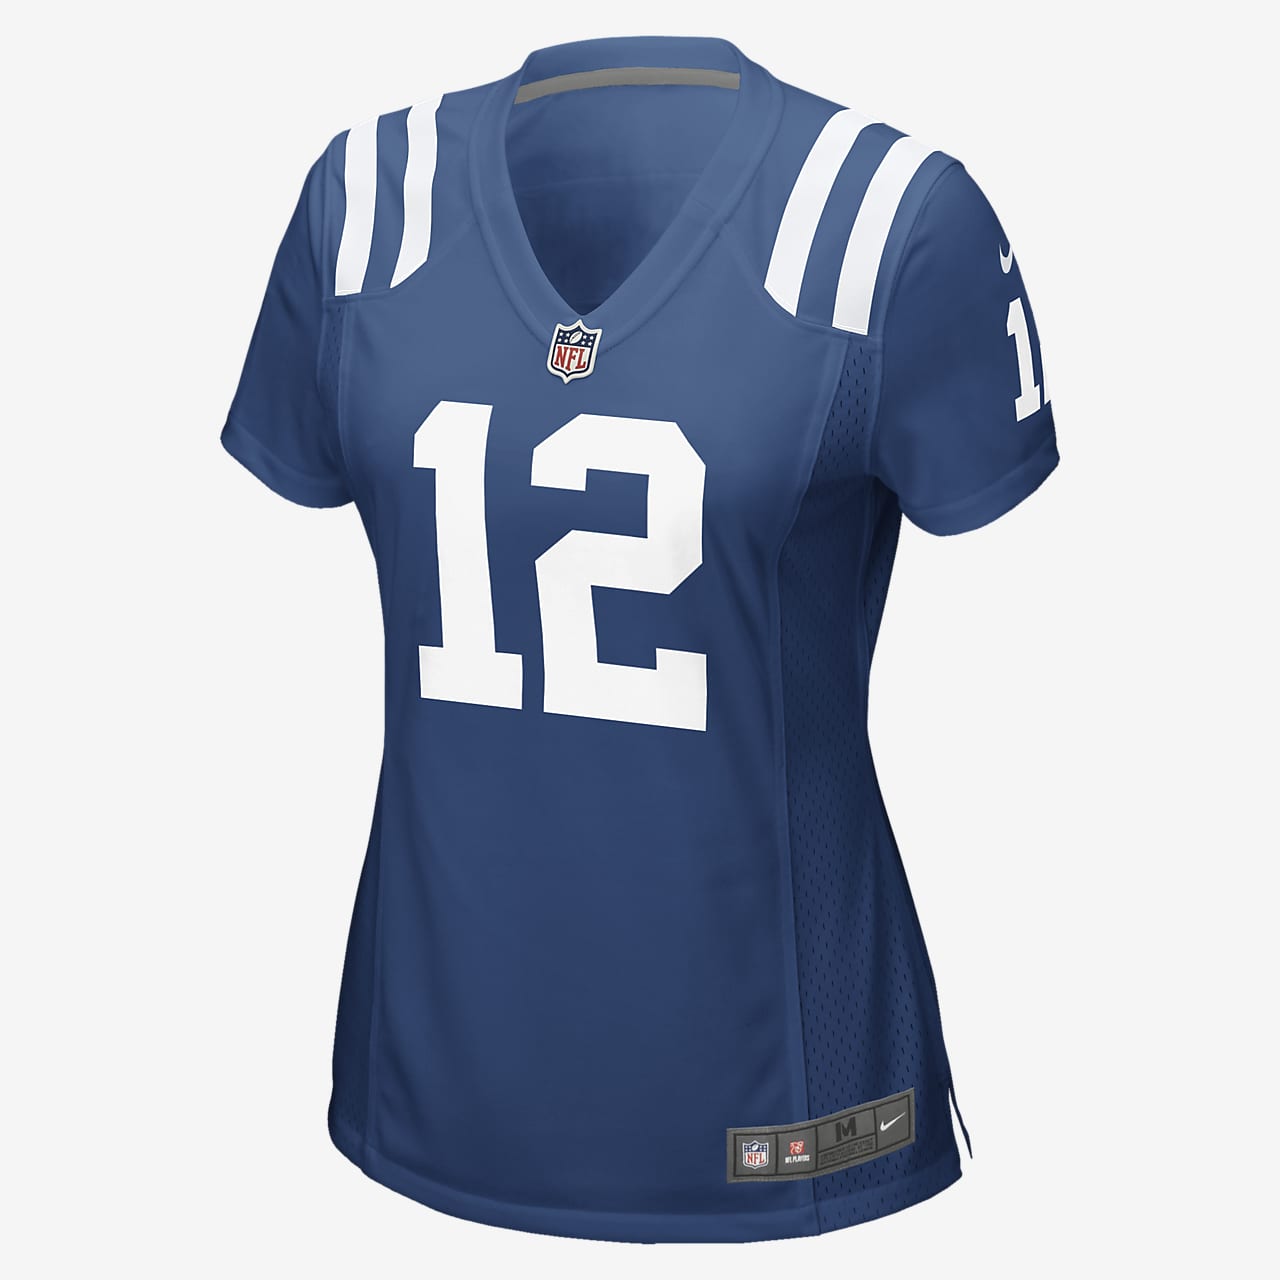 NFL Indianapolis Colts (Andrew Luck) Women's Game Football Jersey